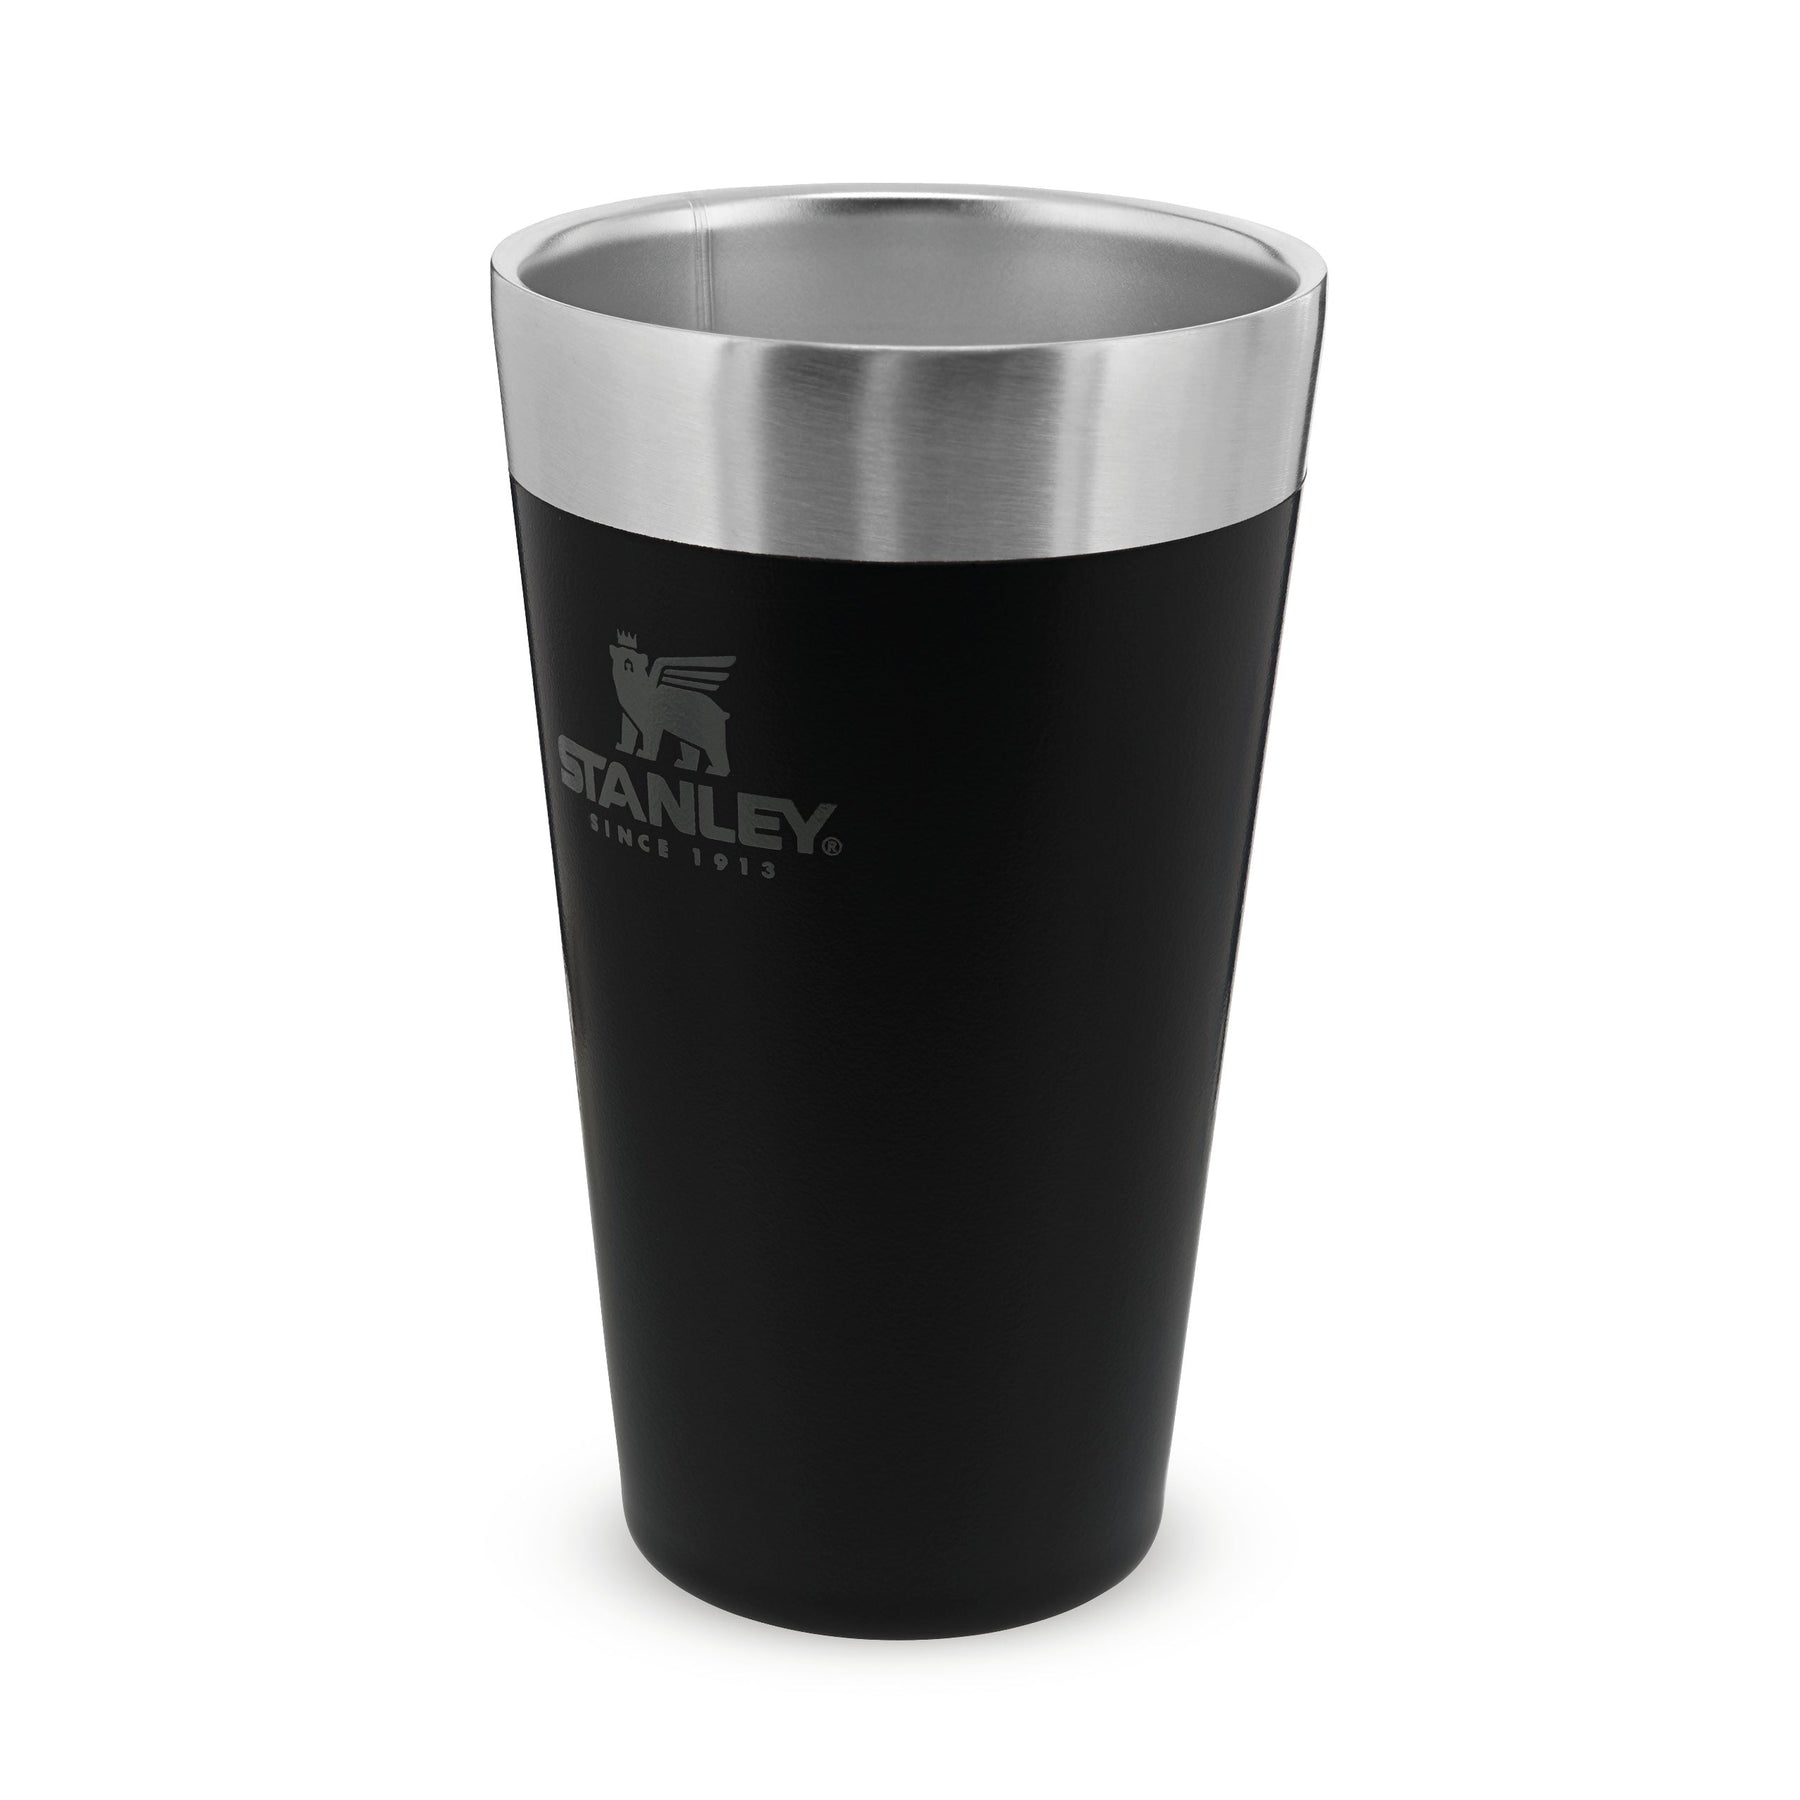 Stackable Stanley® Pint - Limited Edition Eb Print